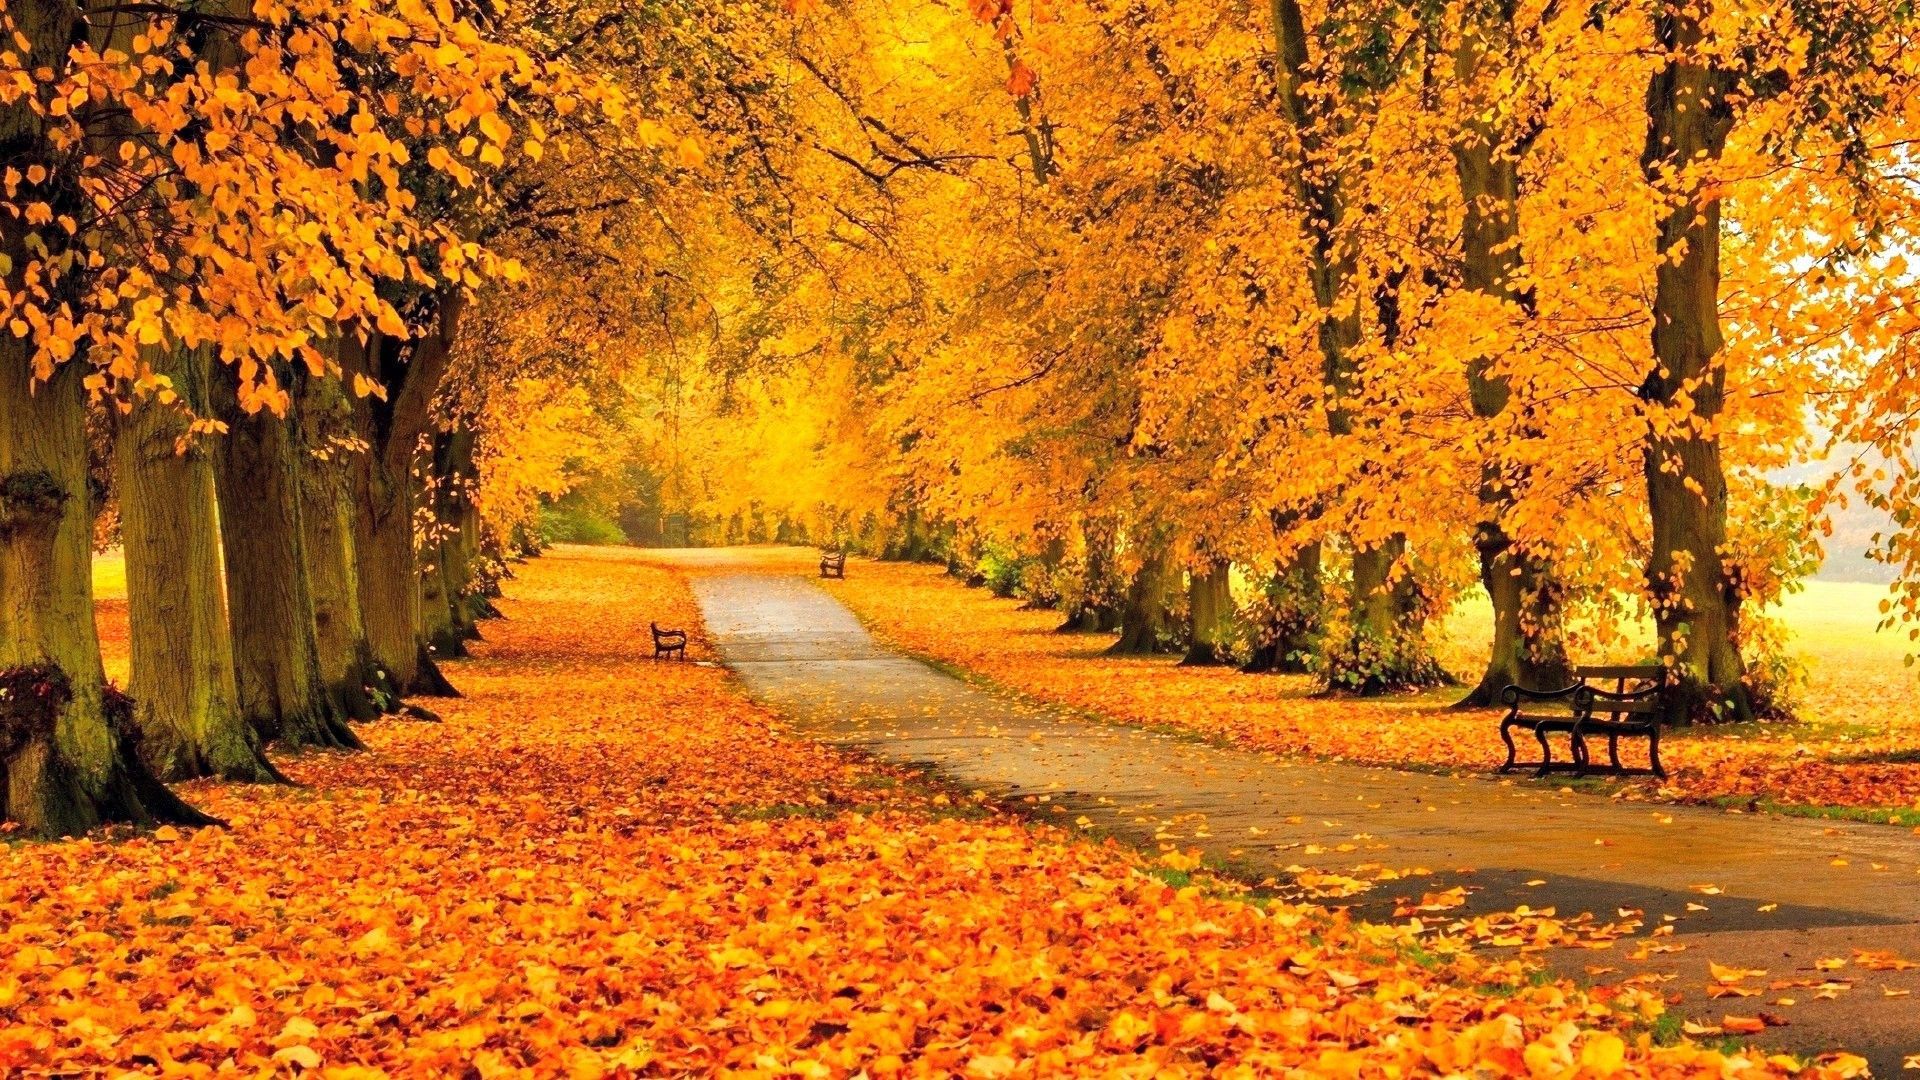 Other Autumn Park Path Sidewalk Trees Benches Fall Leaves Walkway Wallpaper Backgrounds Free